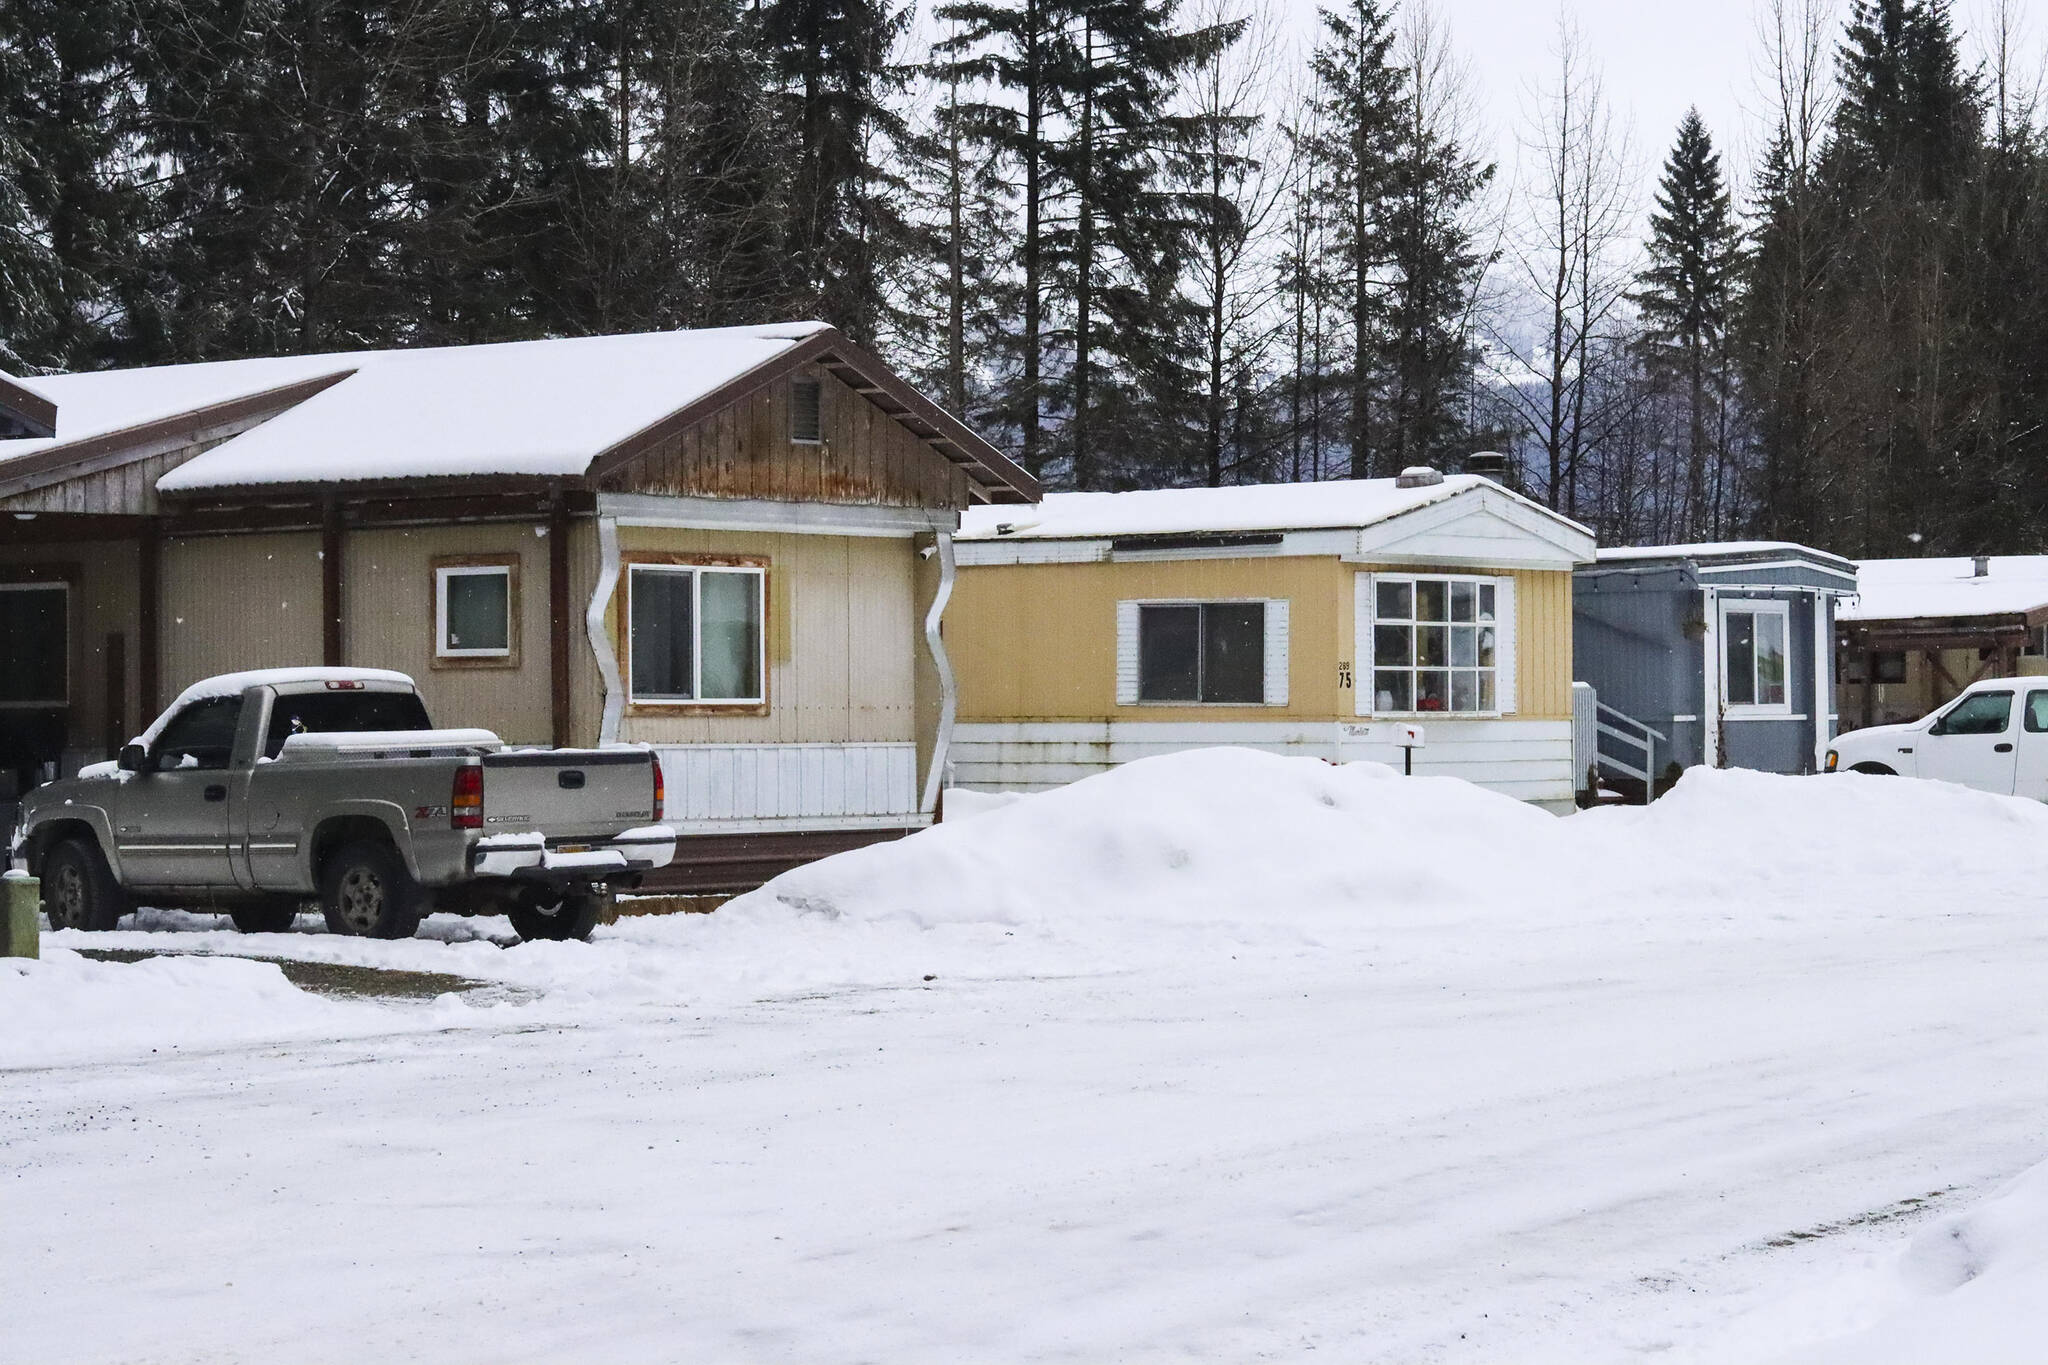 Juneau police officers hunkered down next to the berm visible between homes, said an eyewitness, before an officer fired his weapon three times and striking two trailers, mistakenly believing a man having a mental health crisis had a gun on Tuesday, Feb. 22, 2022. (Michael S. Lockett / Juneau Empire)